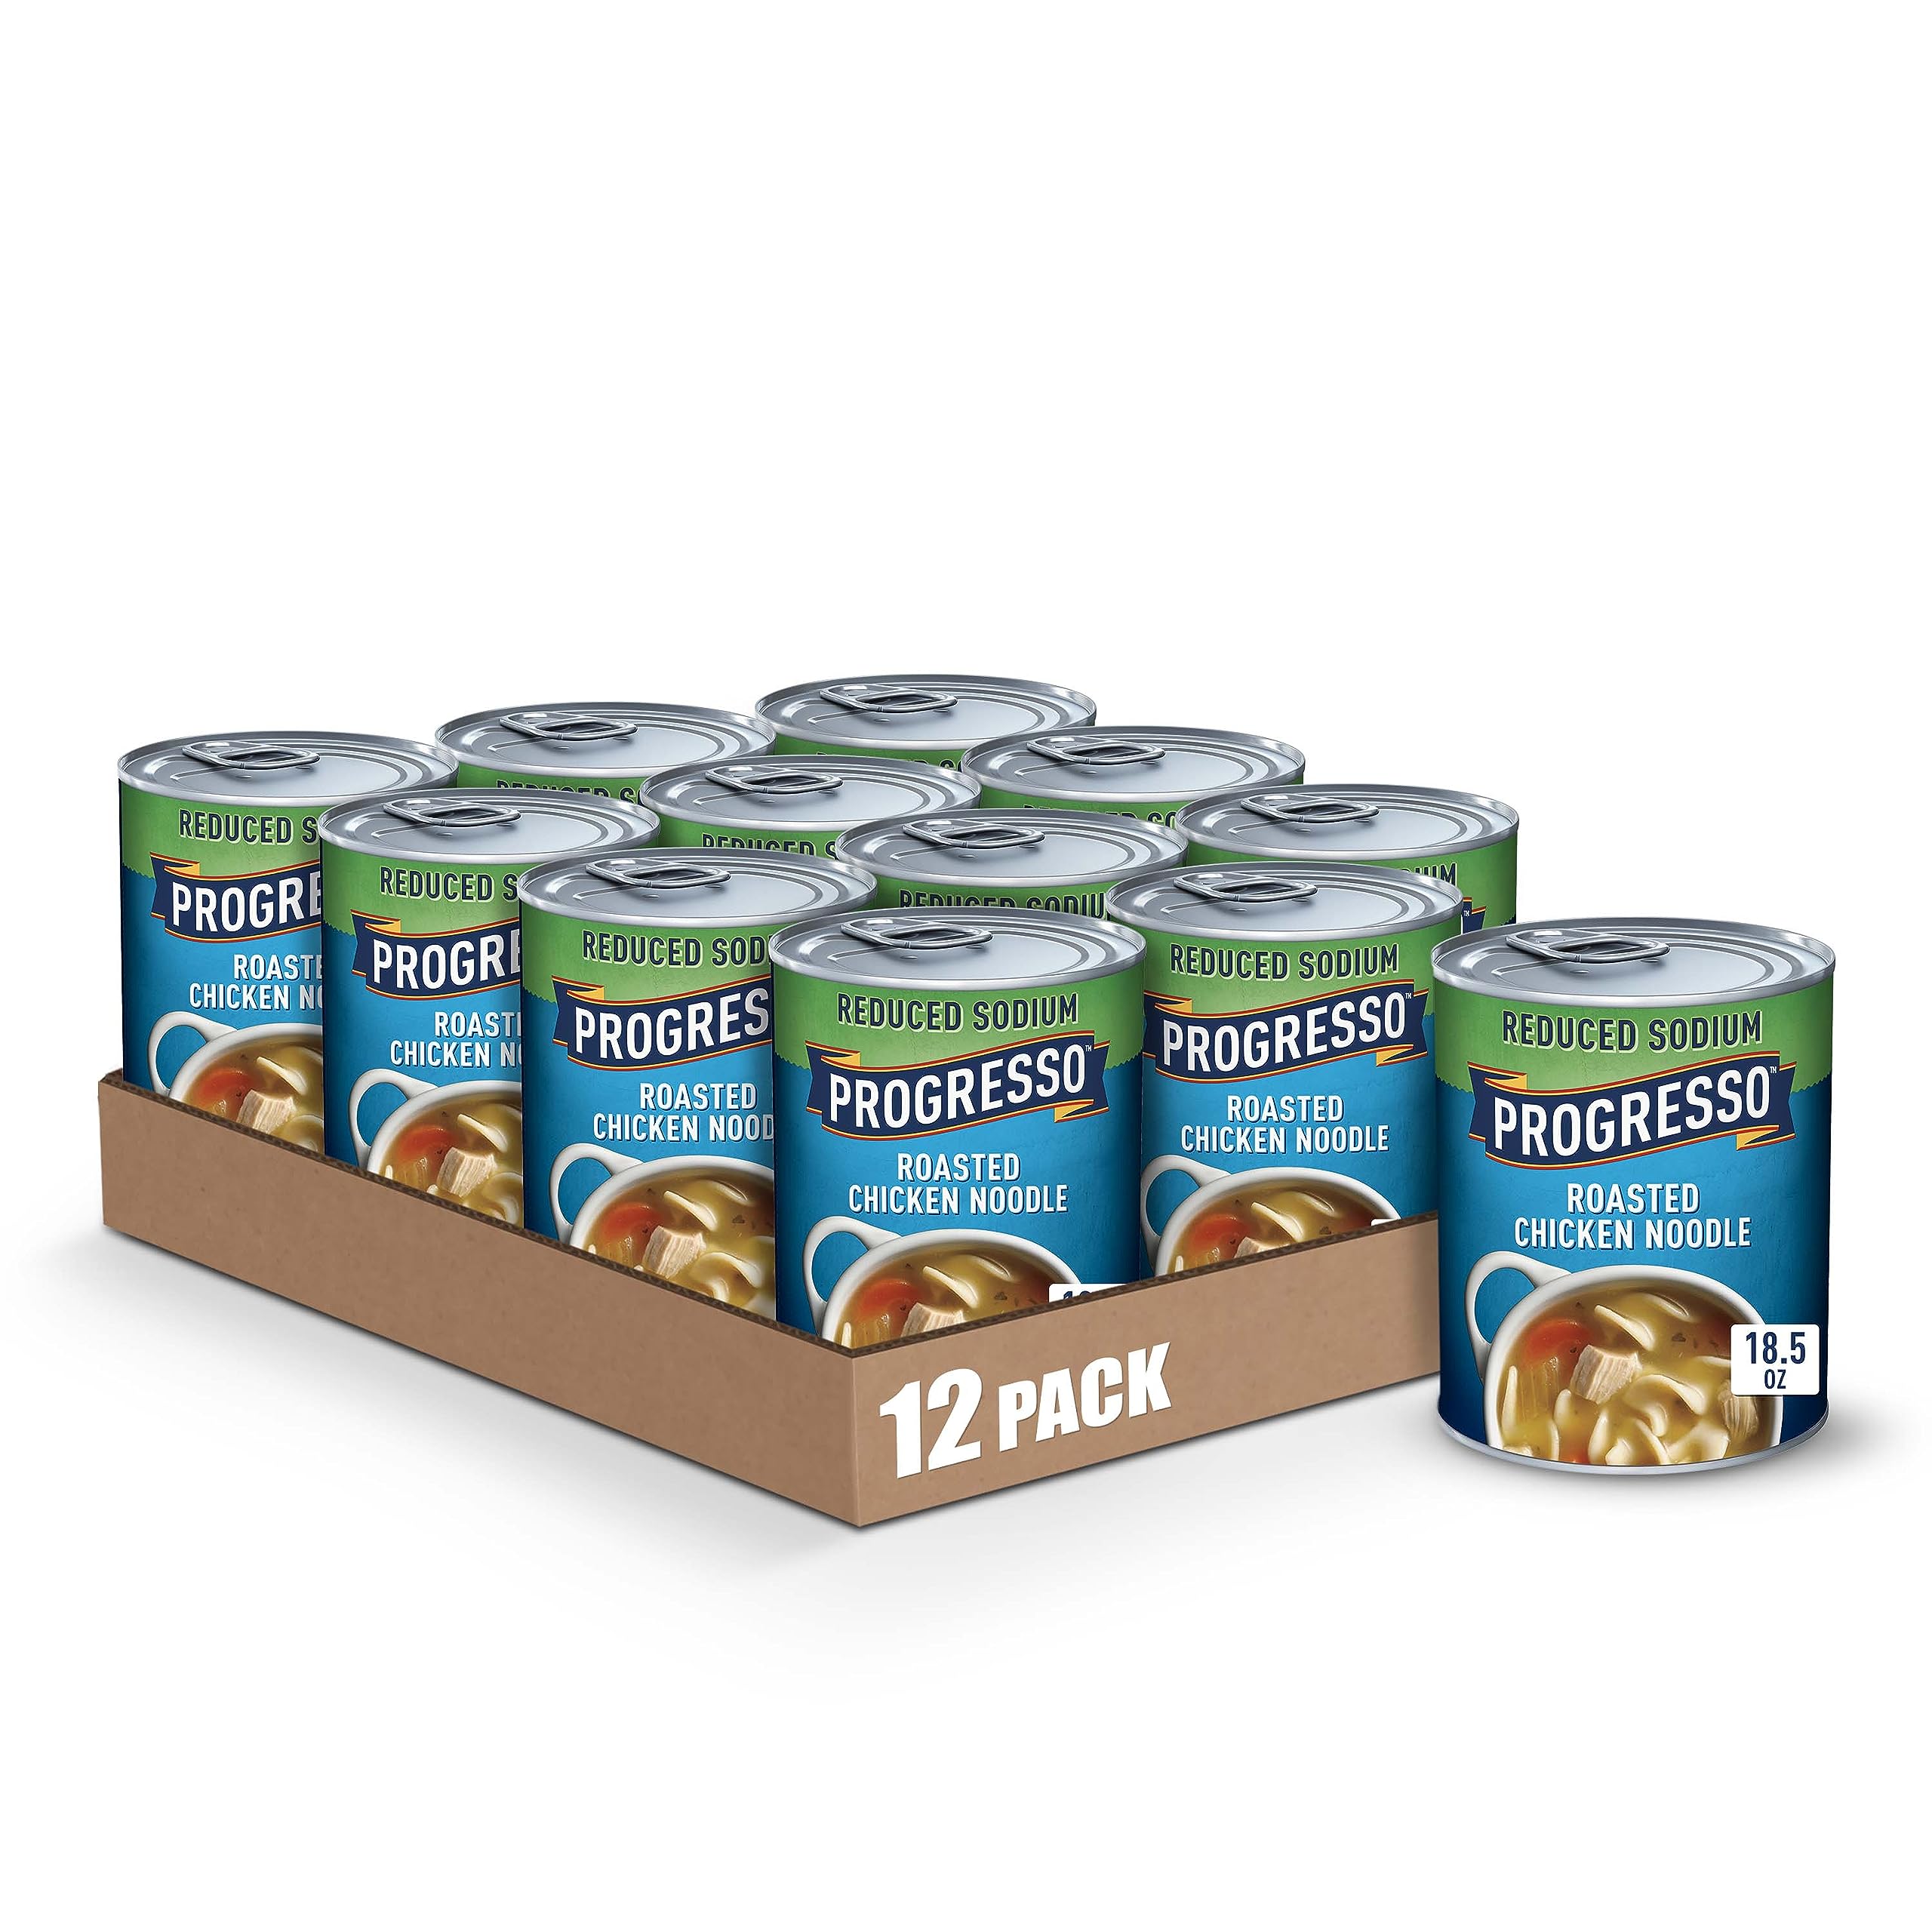 12-Pack 18.5-Oz Progresso Roasted Chicken Noodle Soup (Reduced Sodium) $14.55 w/ S&S + Free S&H w/ Prime or $35+